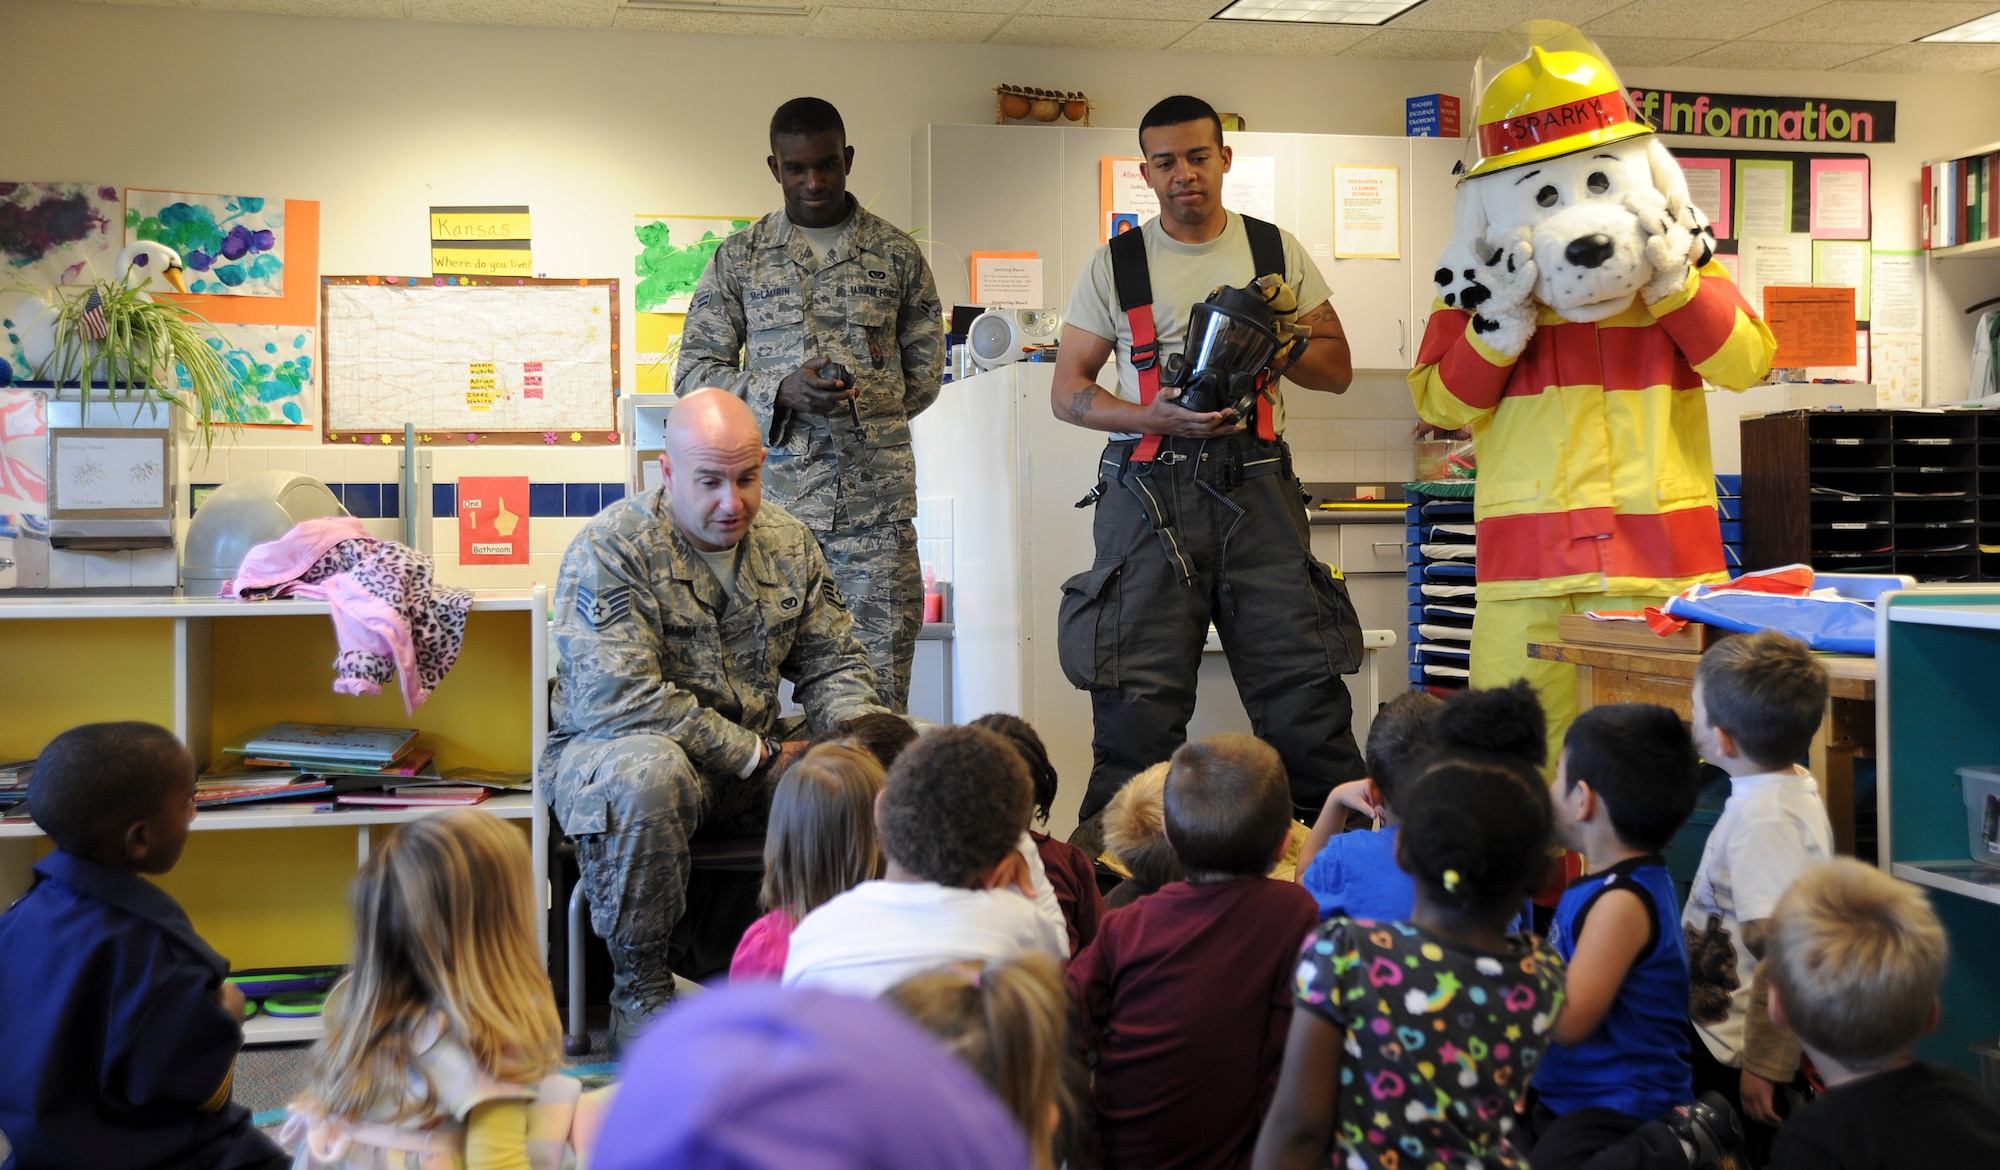 (Left to right) Staff Sgt. Thomas Barina, 22nd Civil Engineer Squadron firefighter crew chief, Airman 1st Class Jeremy McLaurin, 22nd CES firefighter, Staff Sgt. Alfred Mines, 22nd CES crew chief and “Sparky,” the fire safety dog, speak to preschool-aged children at the Child Development Center about fire safety, Oct. 10, 2012, McConnell Air Force Base, Kan. The Airmen visited the CDC to ensure the children have a fire safety plan in case of an emergency.  They also demonstrated how firefighters quickly don their safety uniform. (U.S. Air Force photo/Airman 1st Class Jose L. Leon)